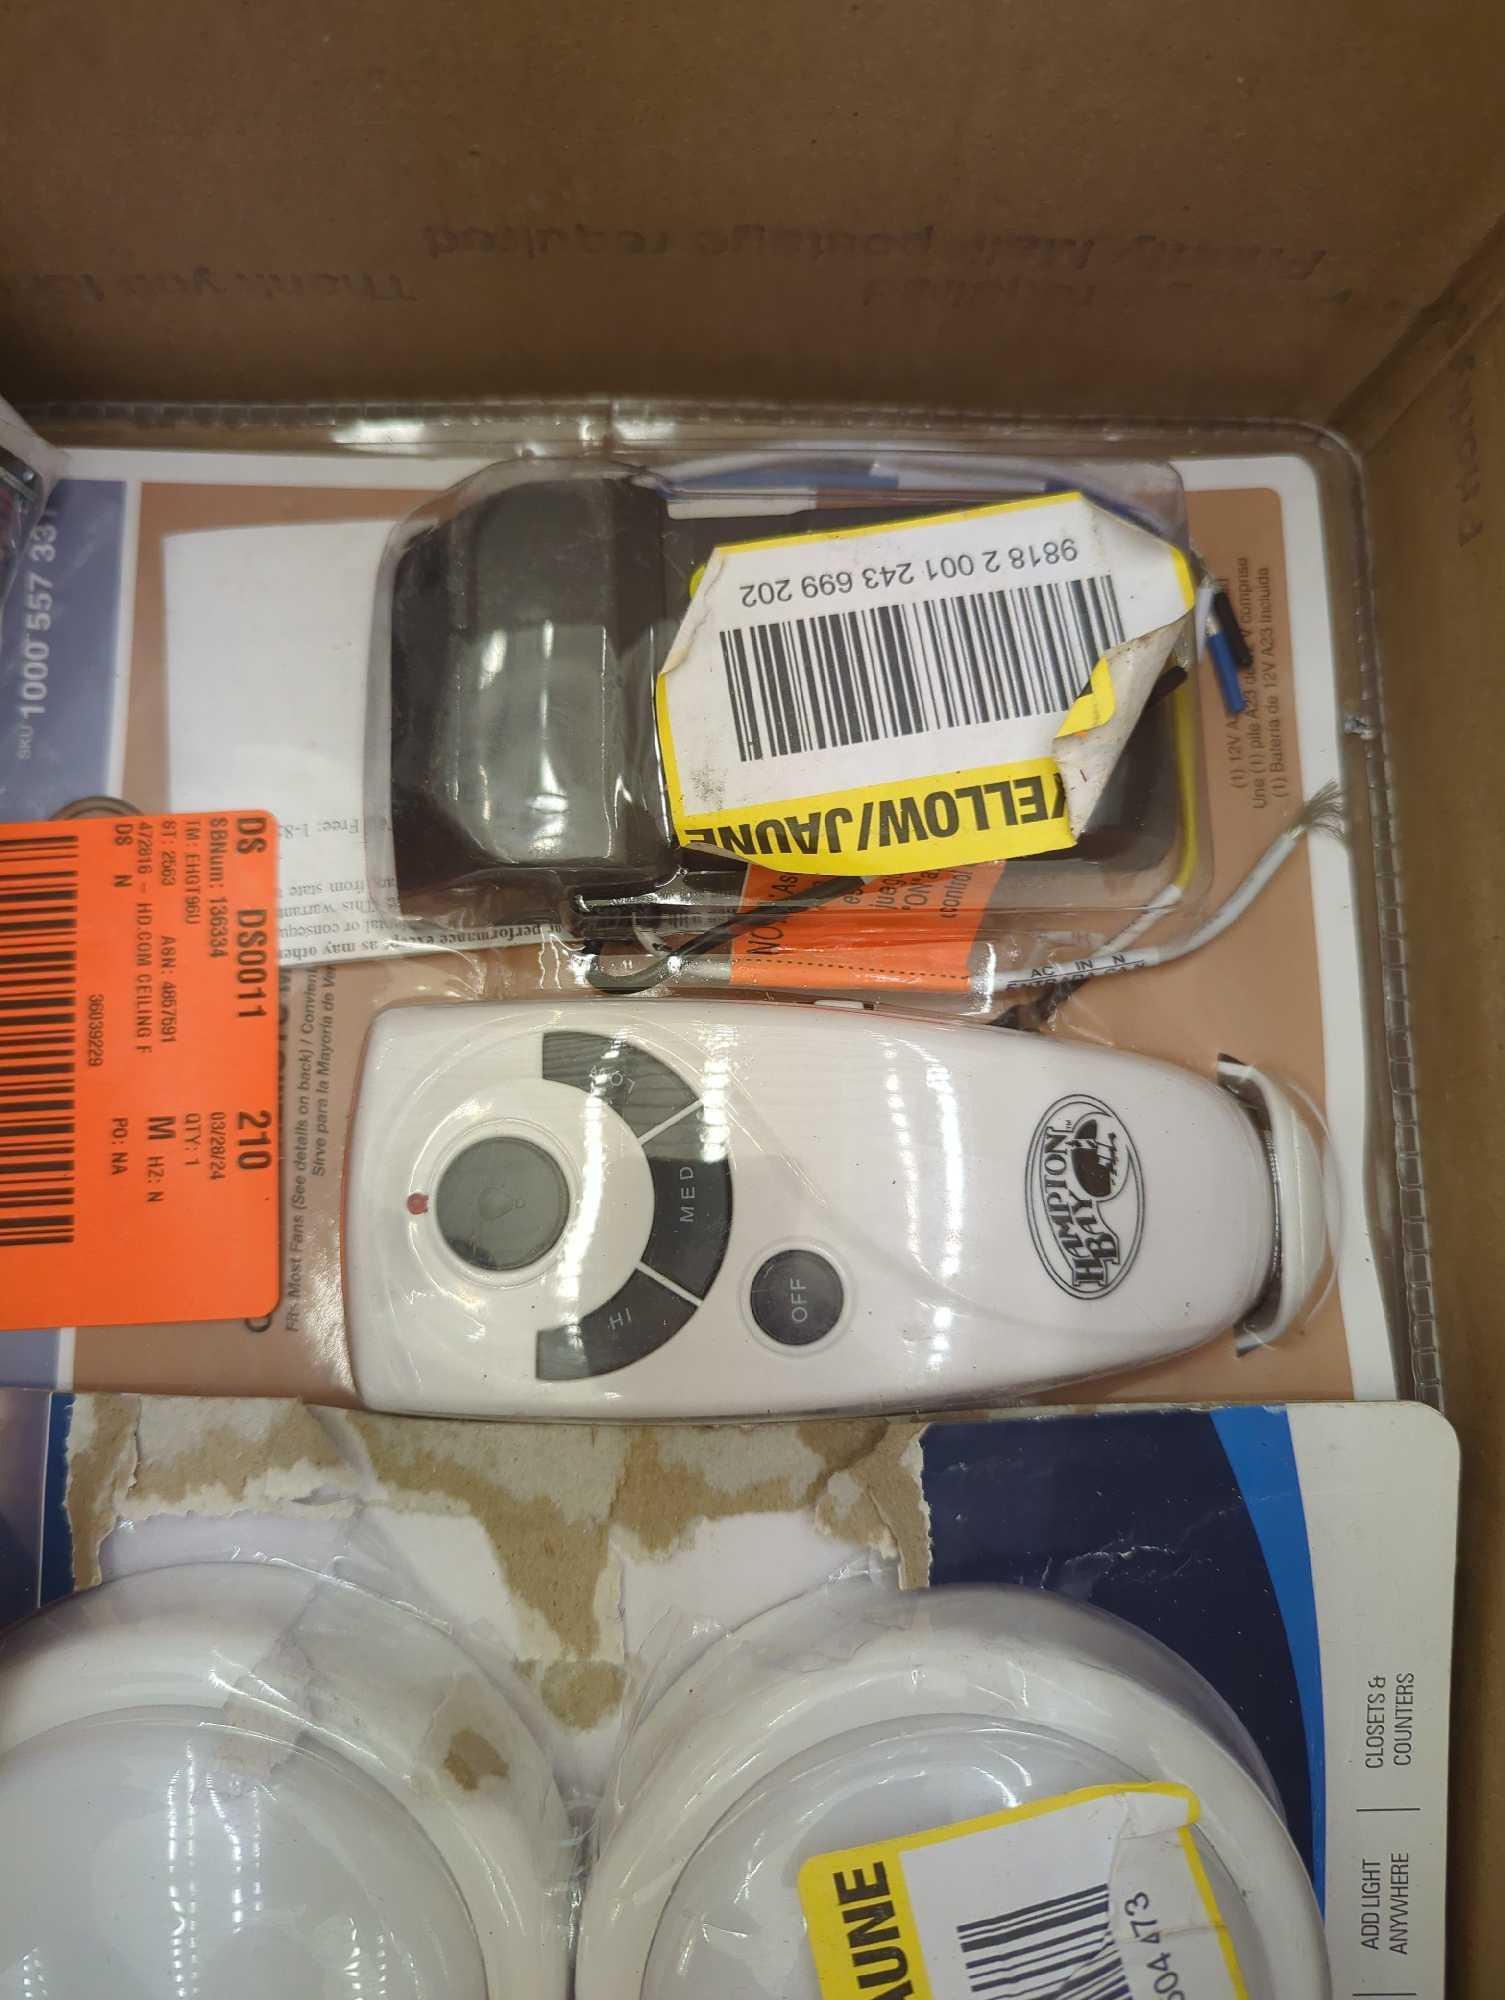 Box Lot of Assorted Items to Include Stud sensor HD25, General Combo Moisture Meter, My Touch Smart